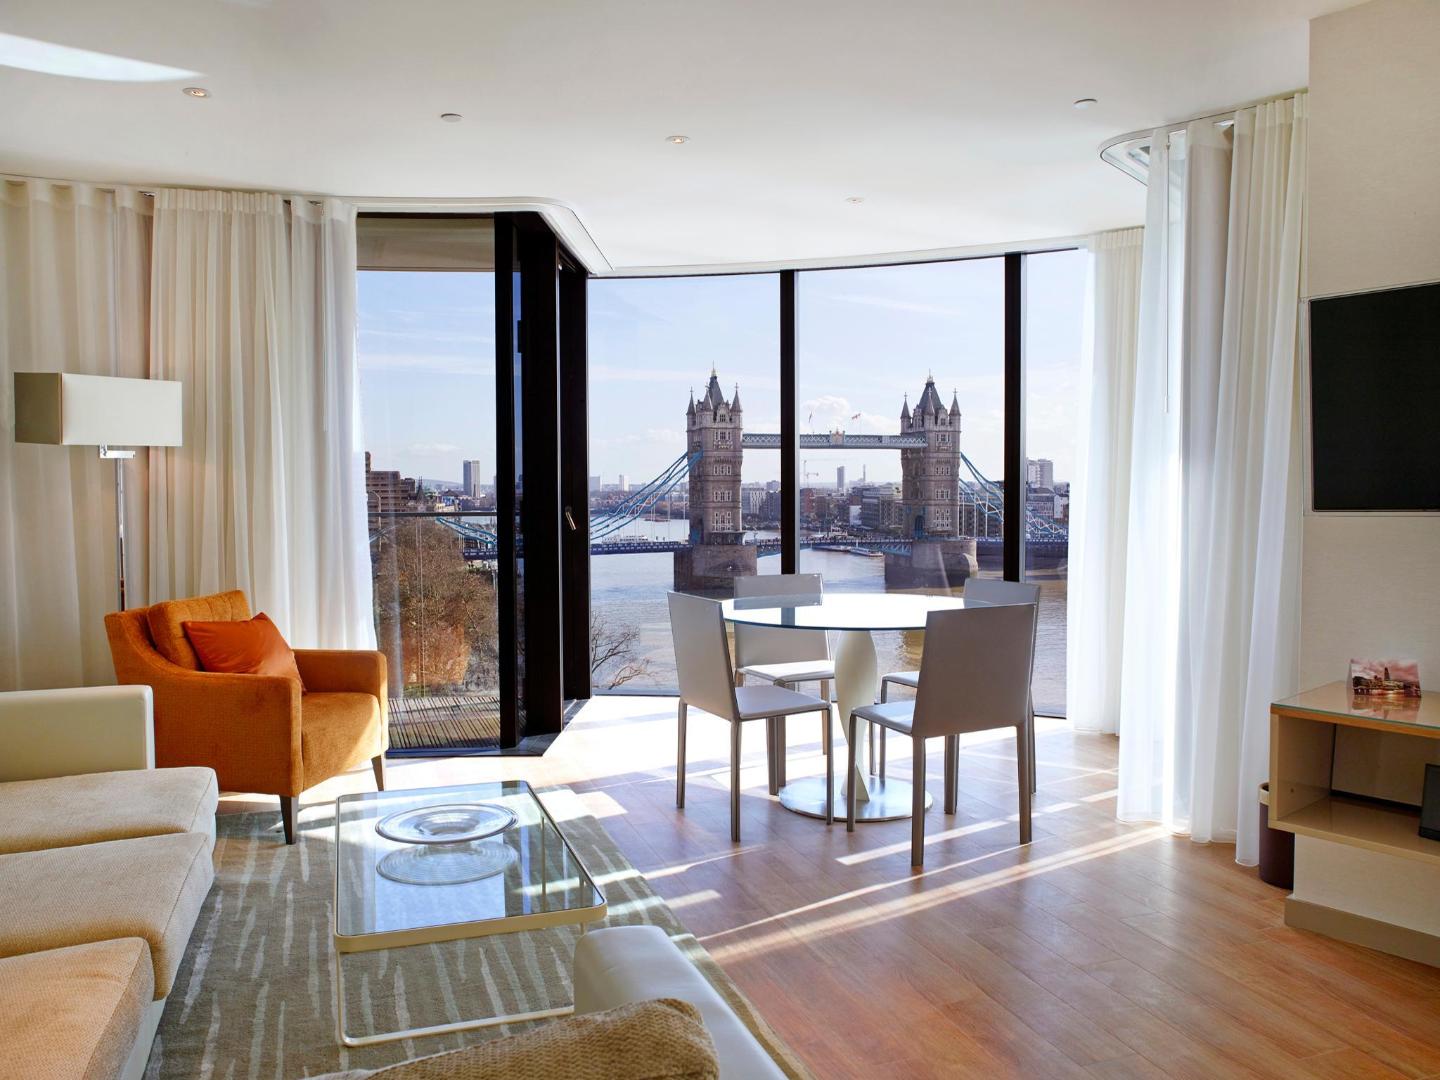 The 10 best apartments in London, UK | Booking.com